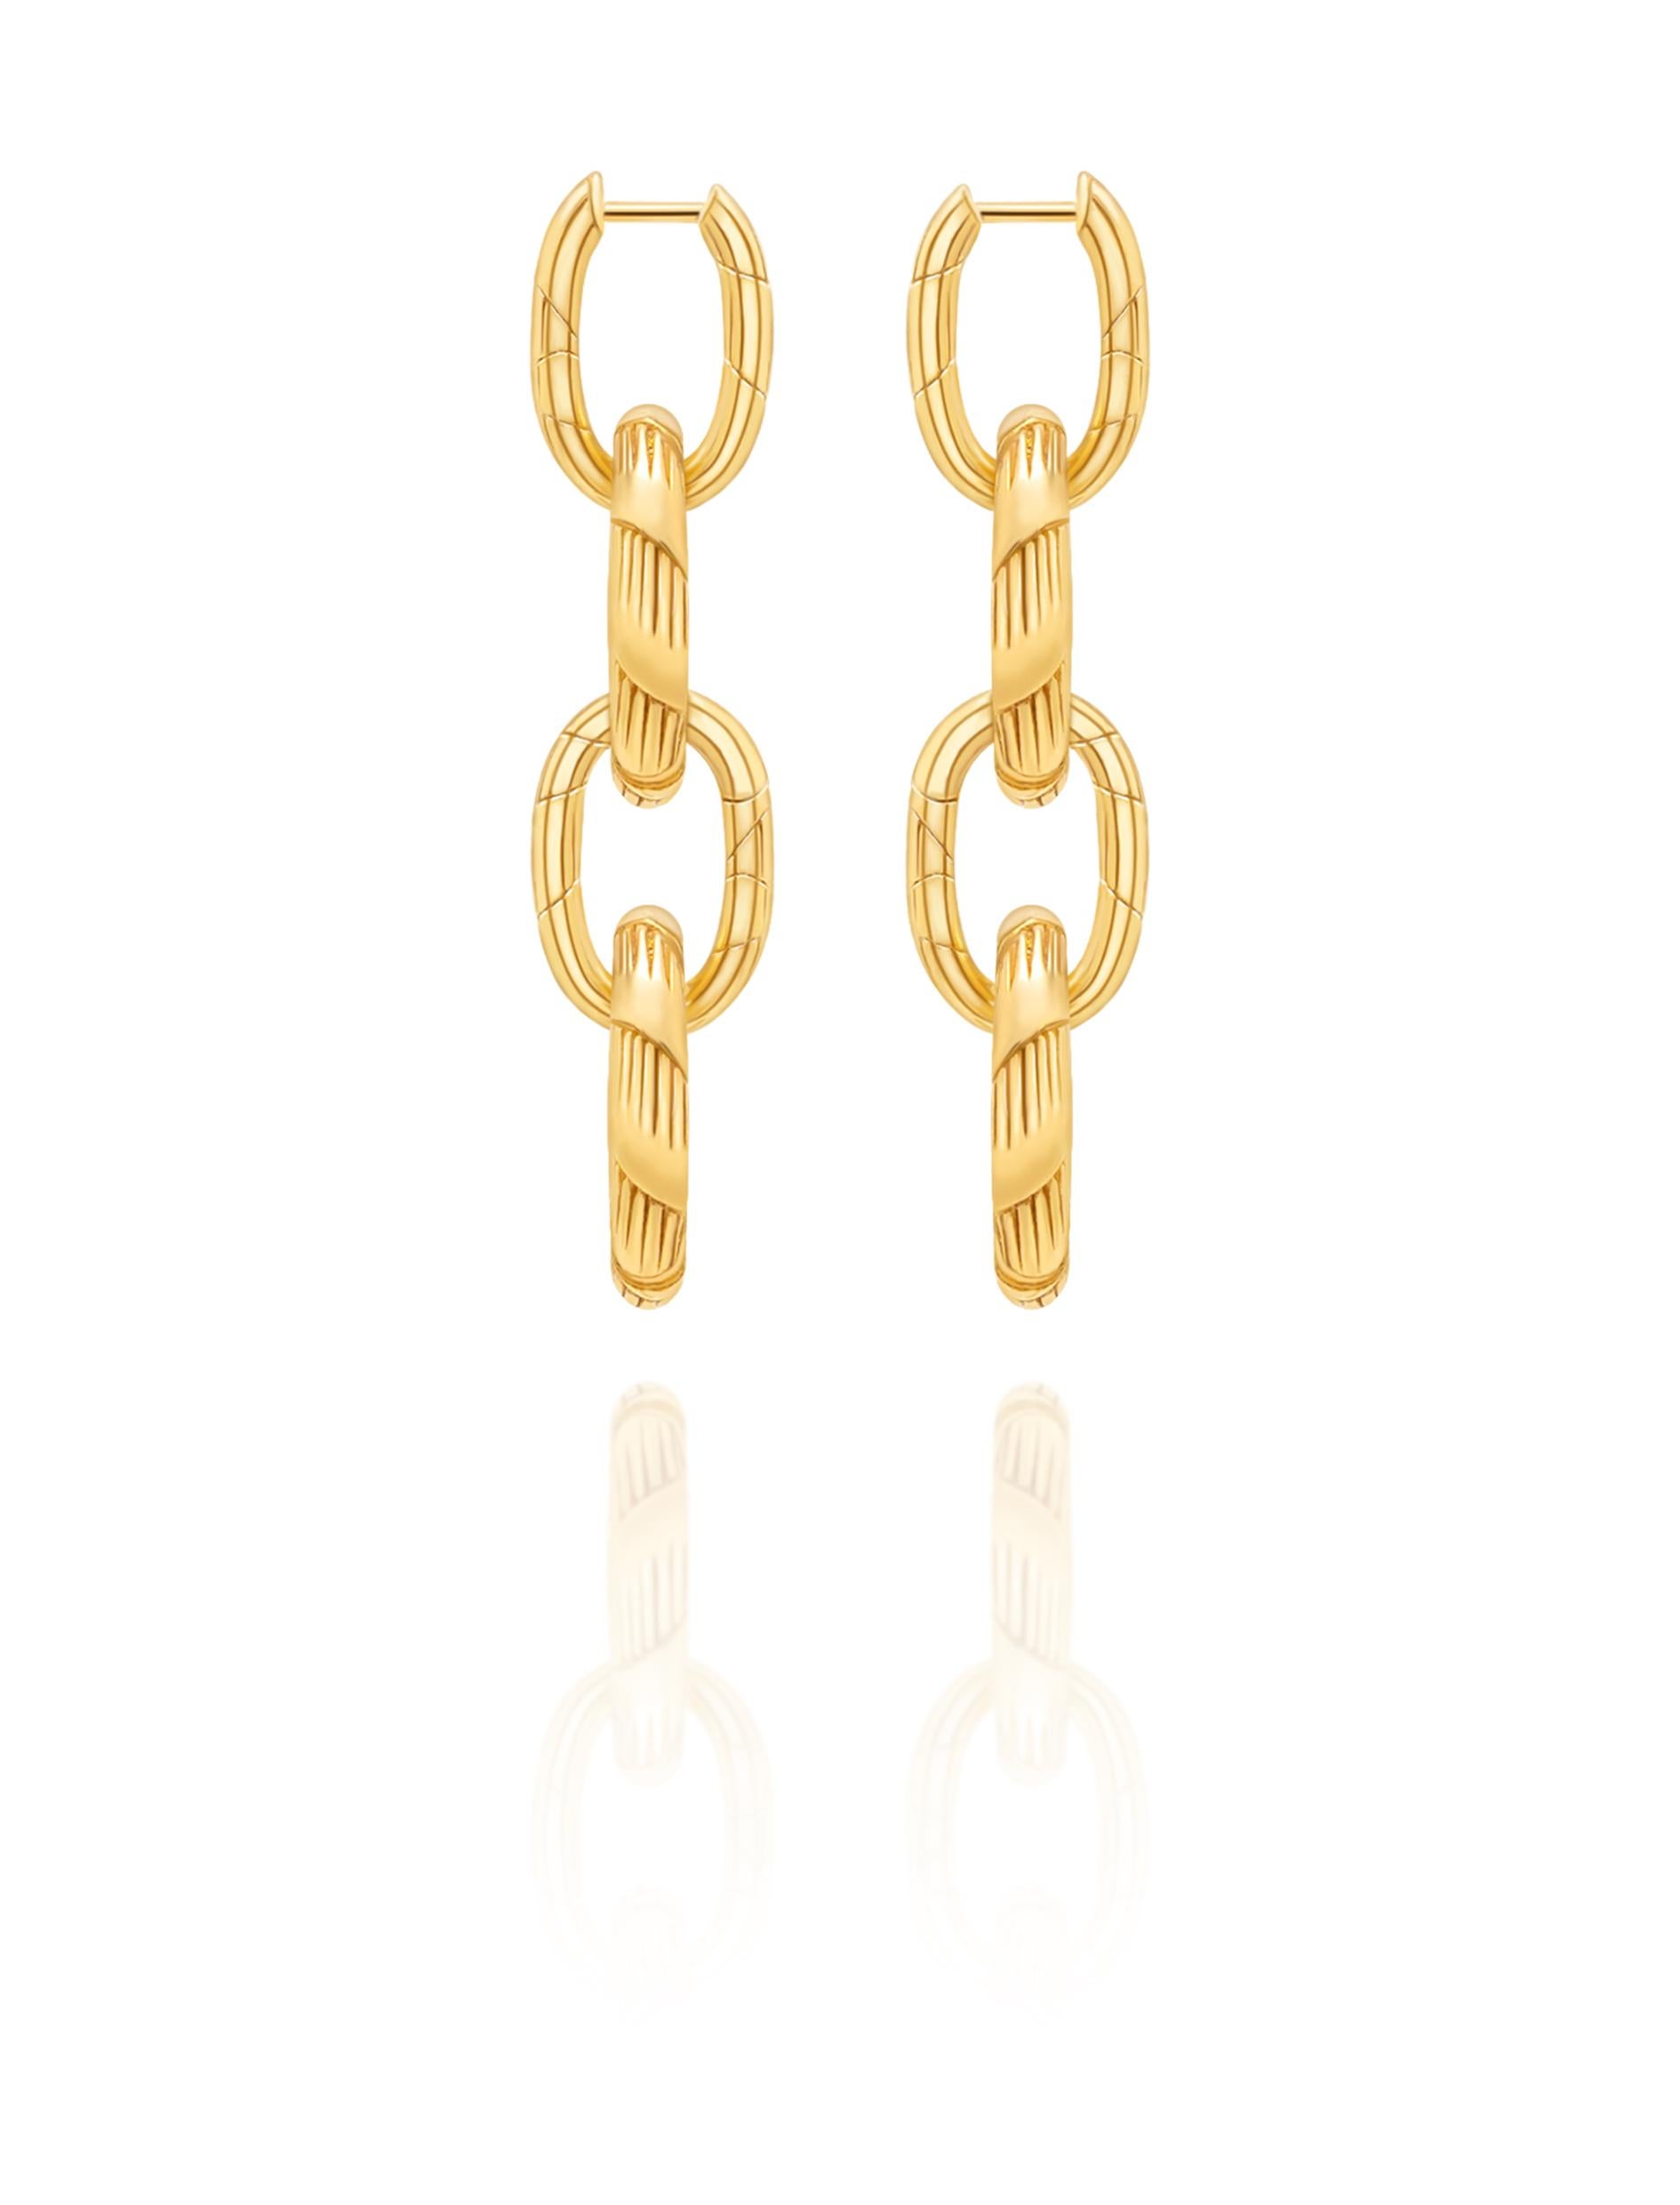 The Eternity Earrings - A Love Affair Collection

The matching earrings collection to the original necklace collection changes the scope of sustainable luxury forever. We have created a new versatile way to wear earrings. The Eternity Earrings is